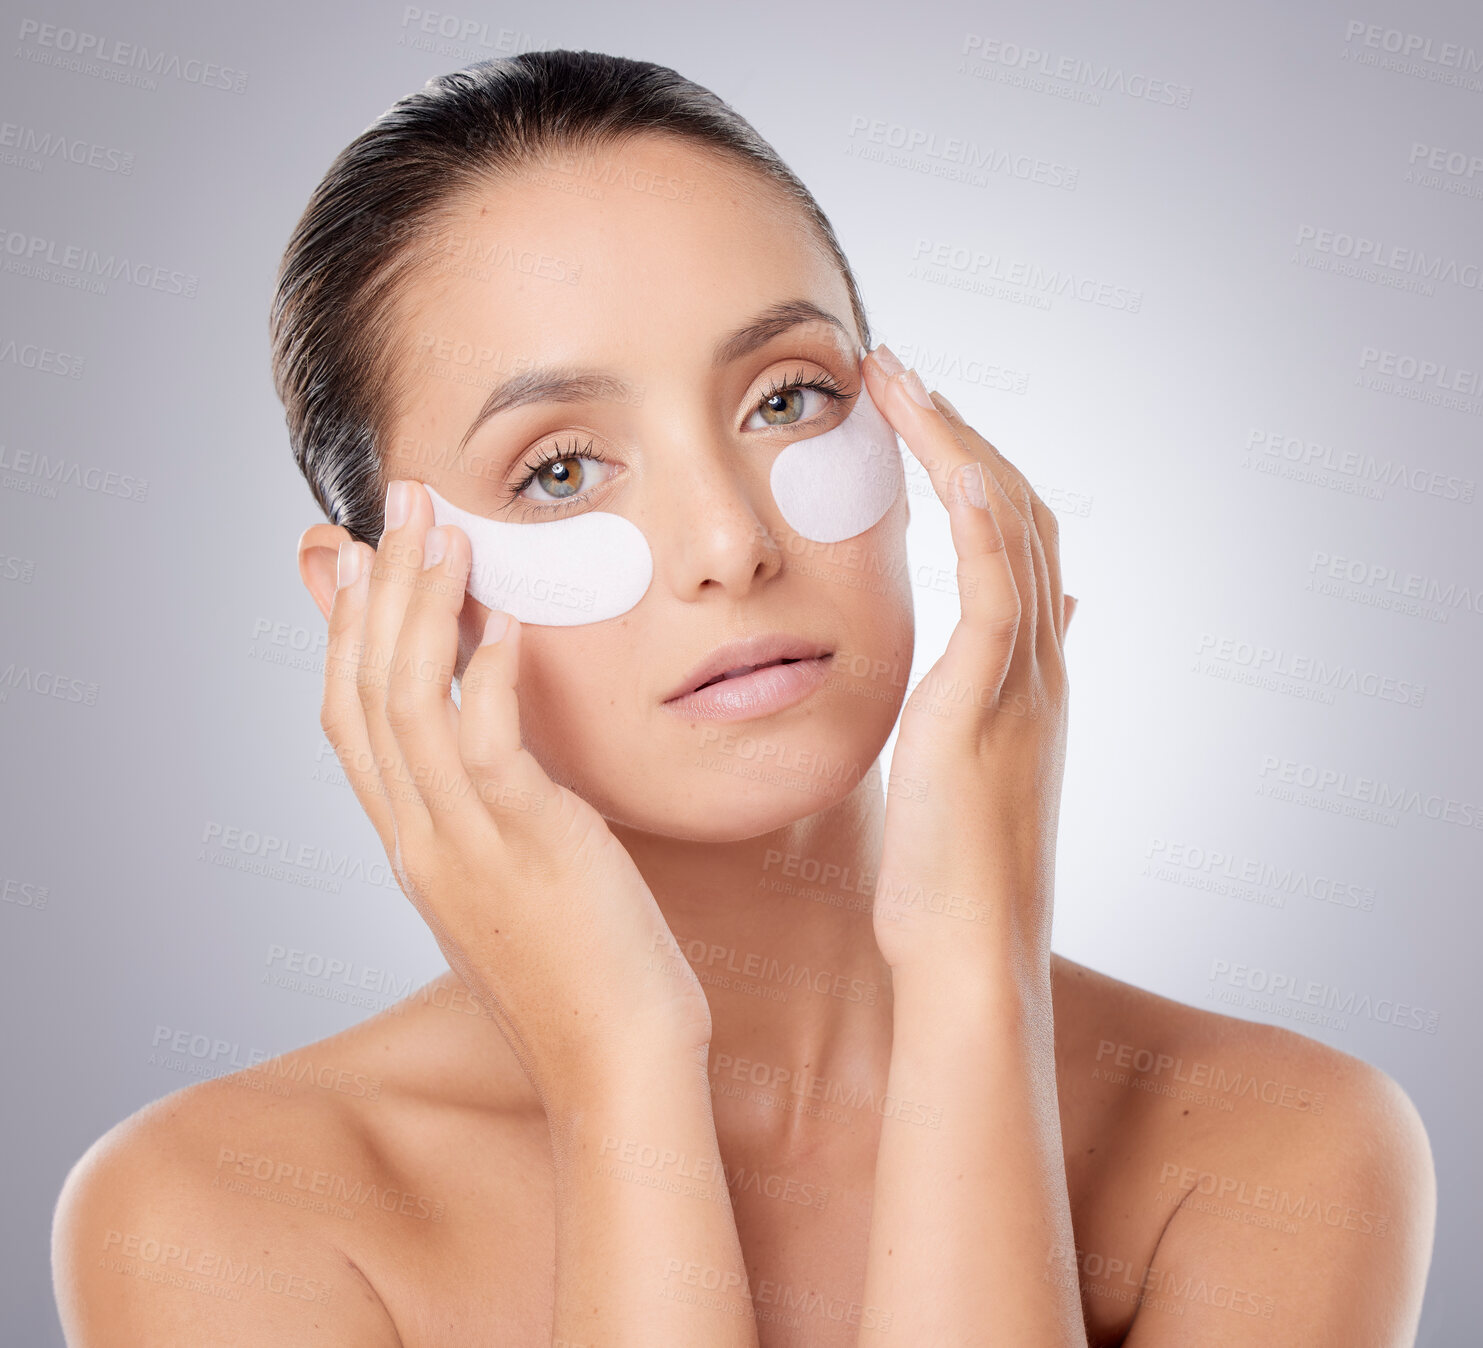 Buy stock photo Shot of a young beautiful woman wearing under-eye patches against a grey background